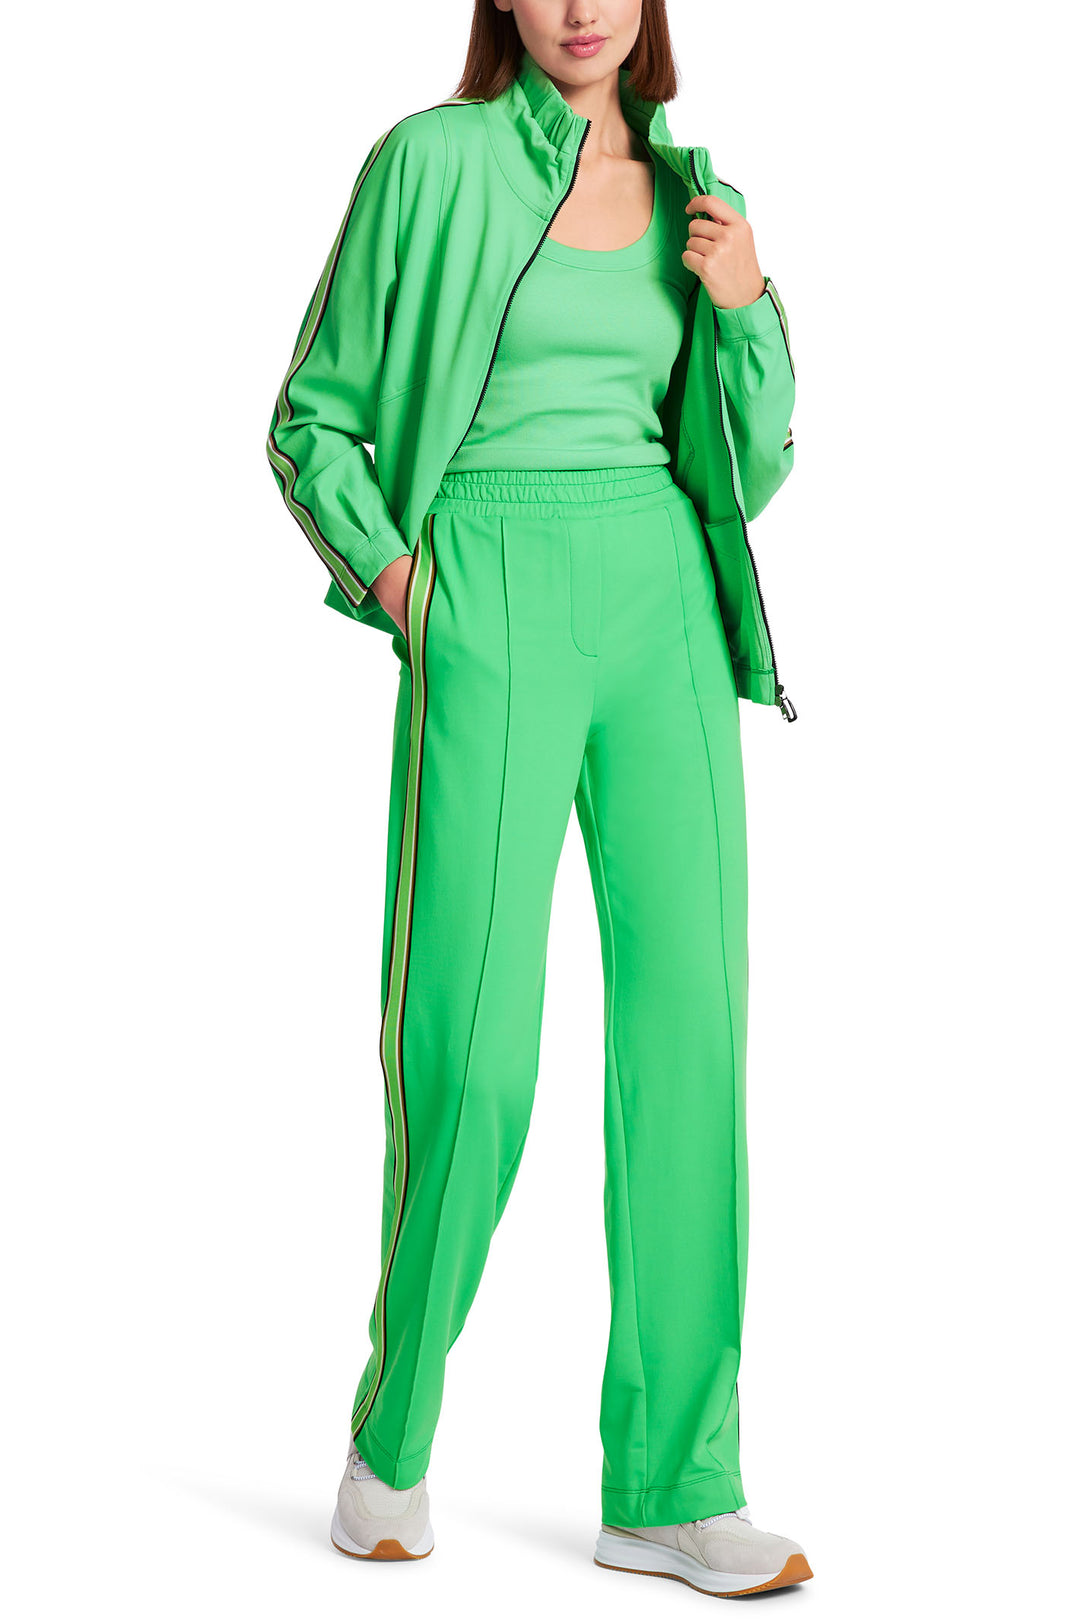 Marc Cain Sports WS 81.43 J51 543 New Neon Green Welby Trousers - Olivia Grace Fashion